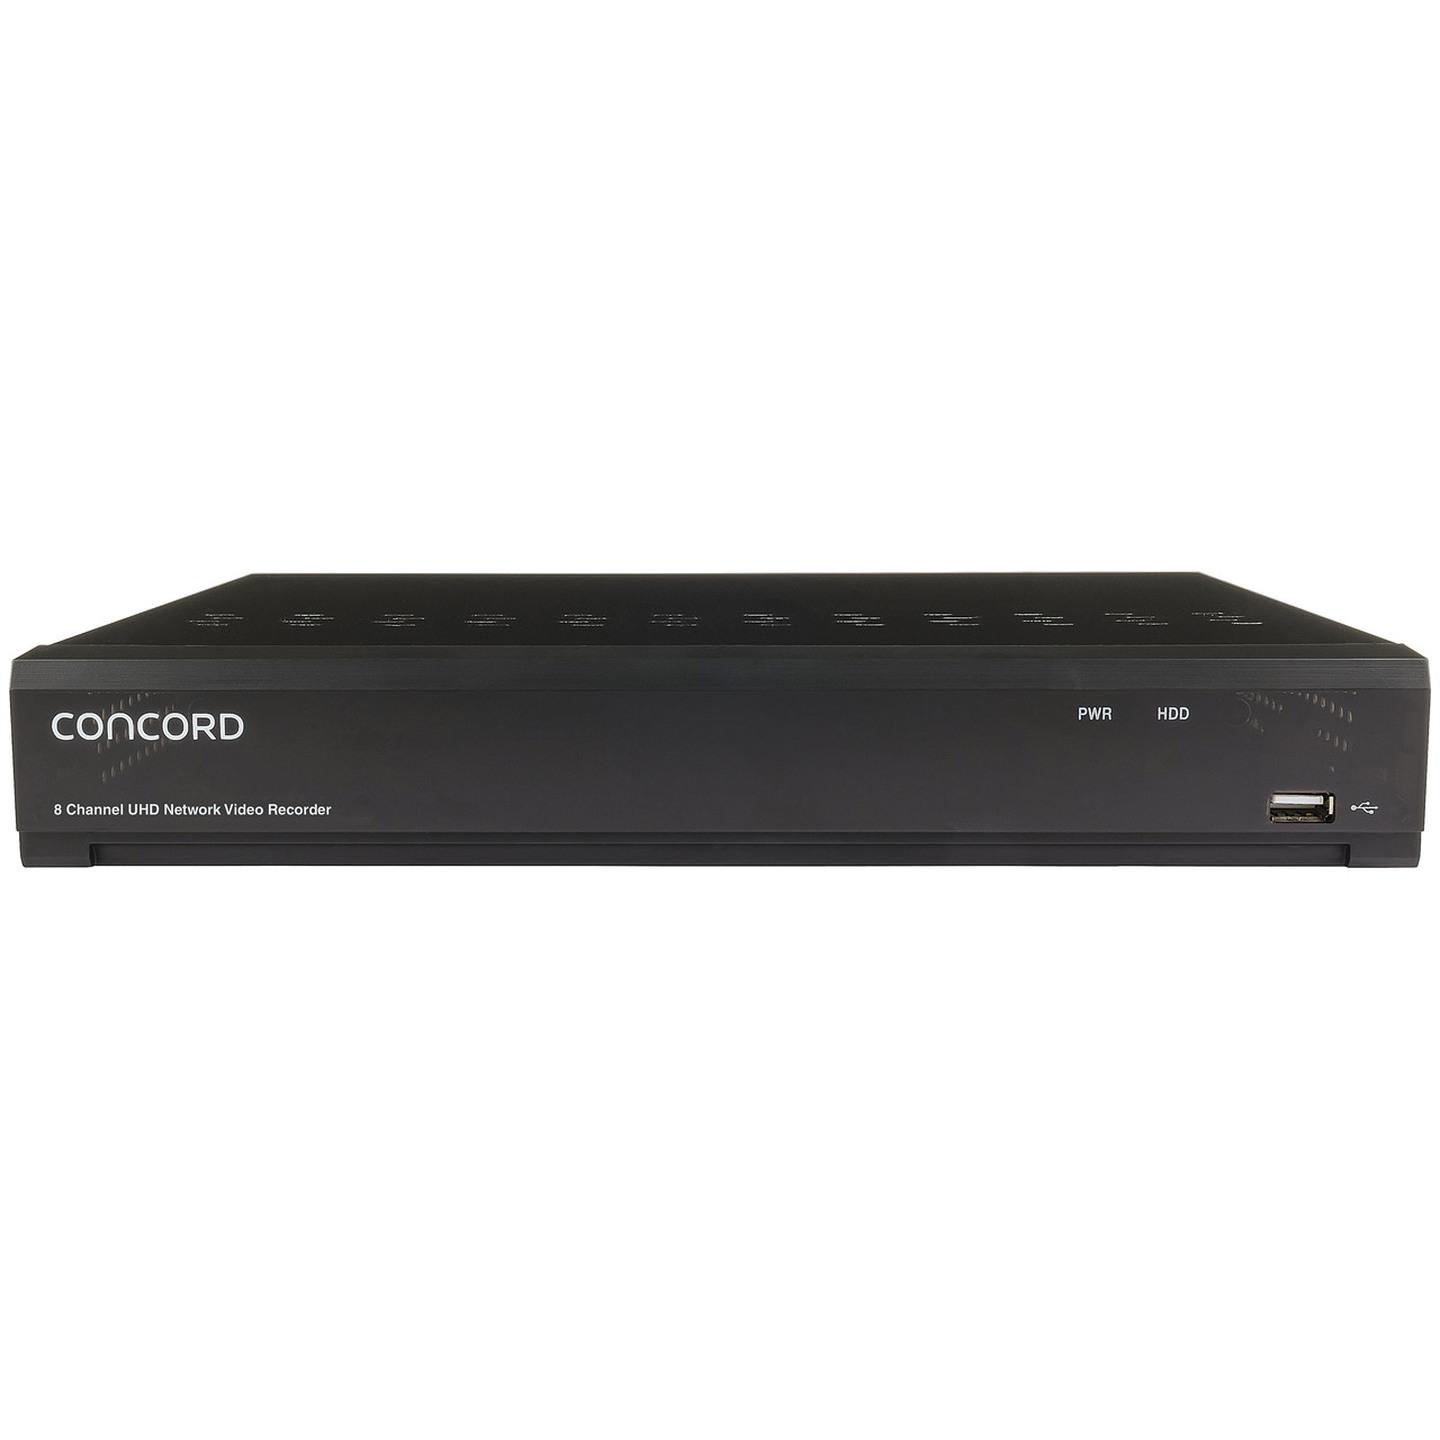 Concord 8 Channel 4K NVR Package - 4x4K PIR IP Cameras and 2x4K PIR IP Floodlight Cameras with 2 way audio